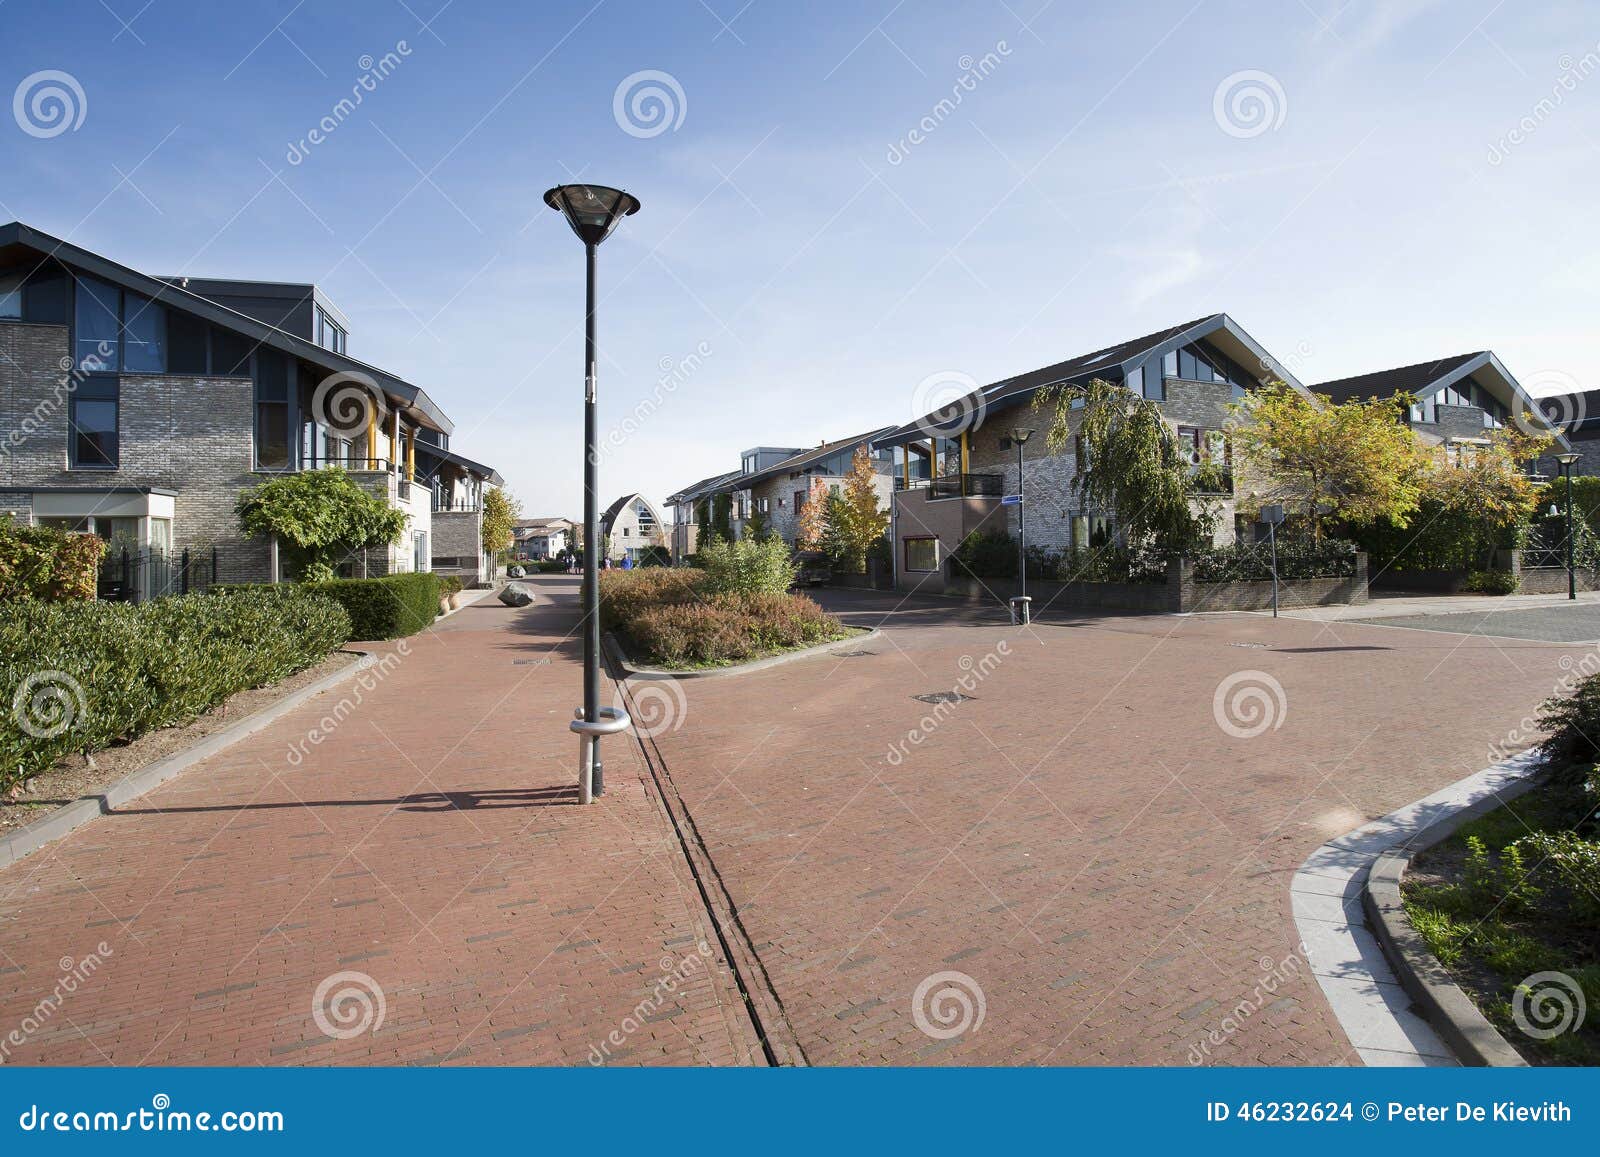 Home zone stock photo. Image of real, landscaped, netherlands - 46232624